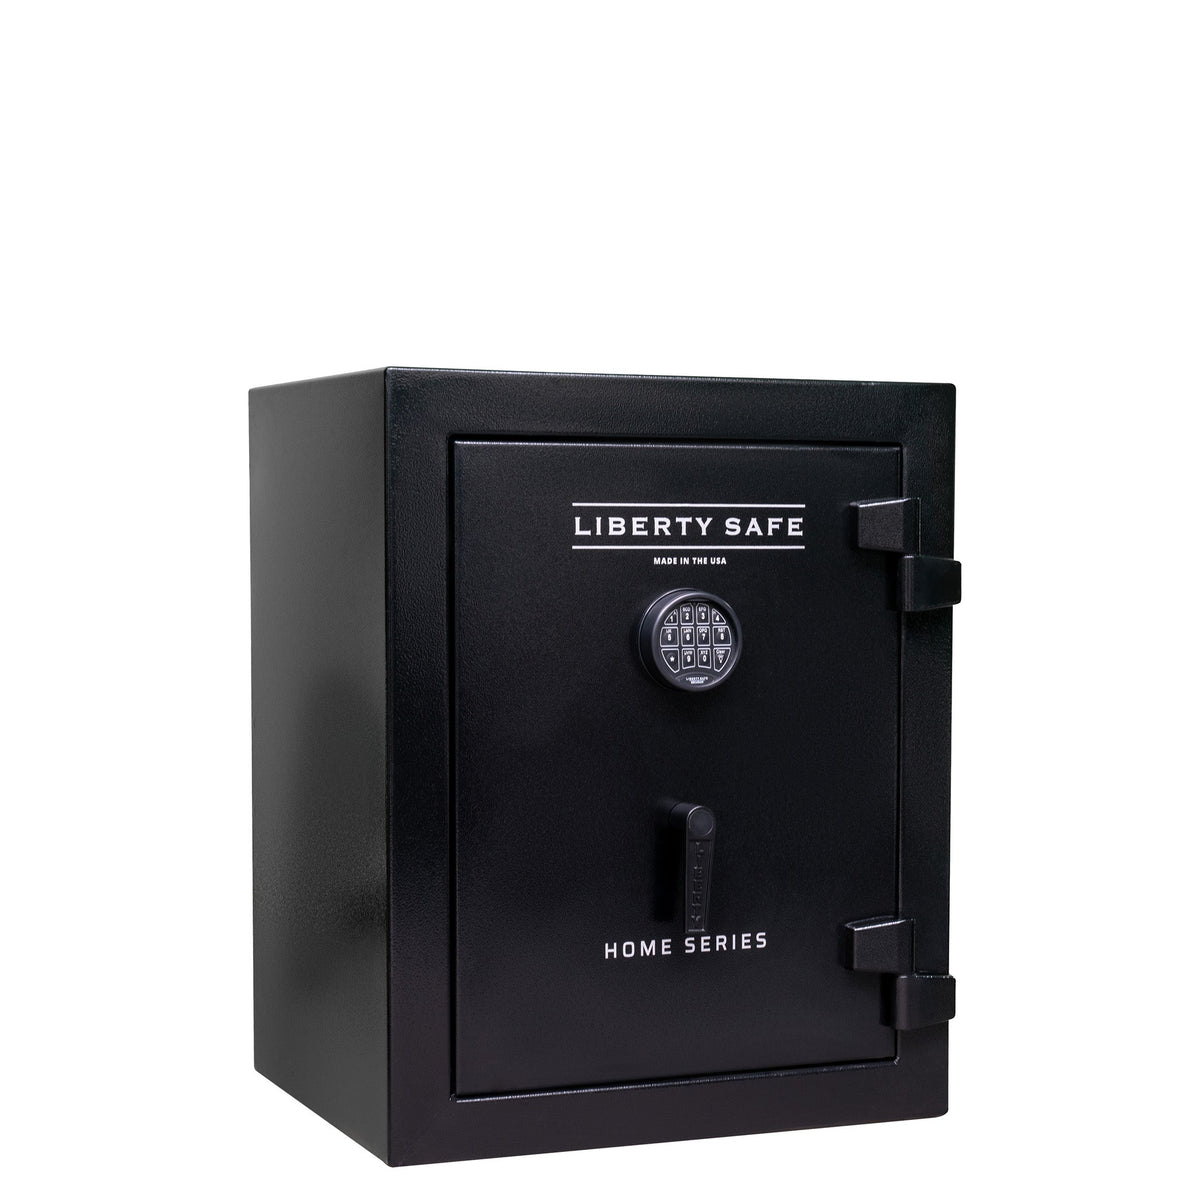 Home series | 60 minute fire protection | textured black - liberty safe - MODLOCK